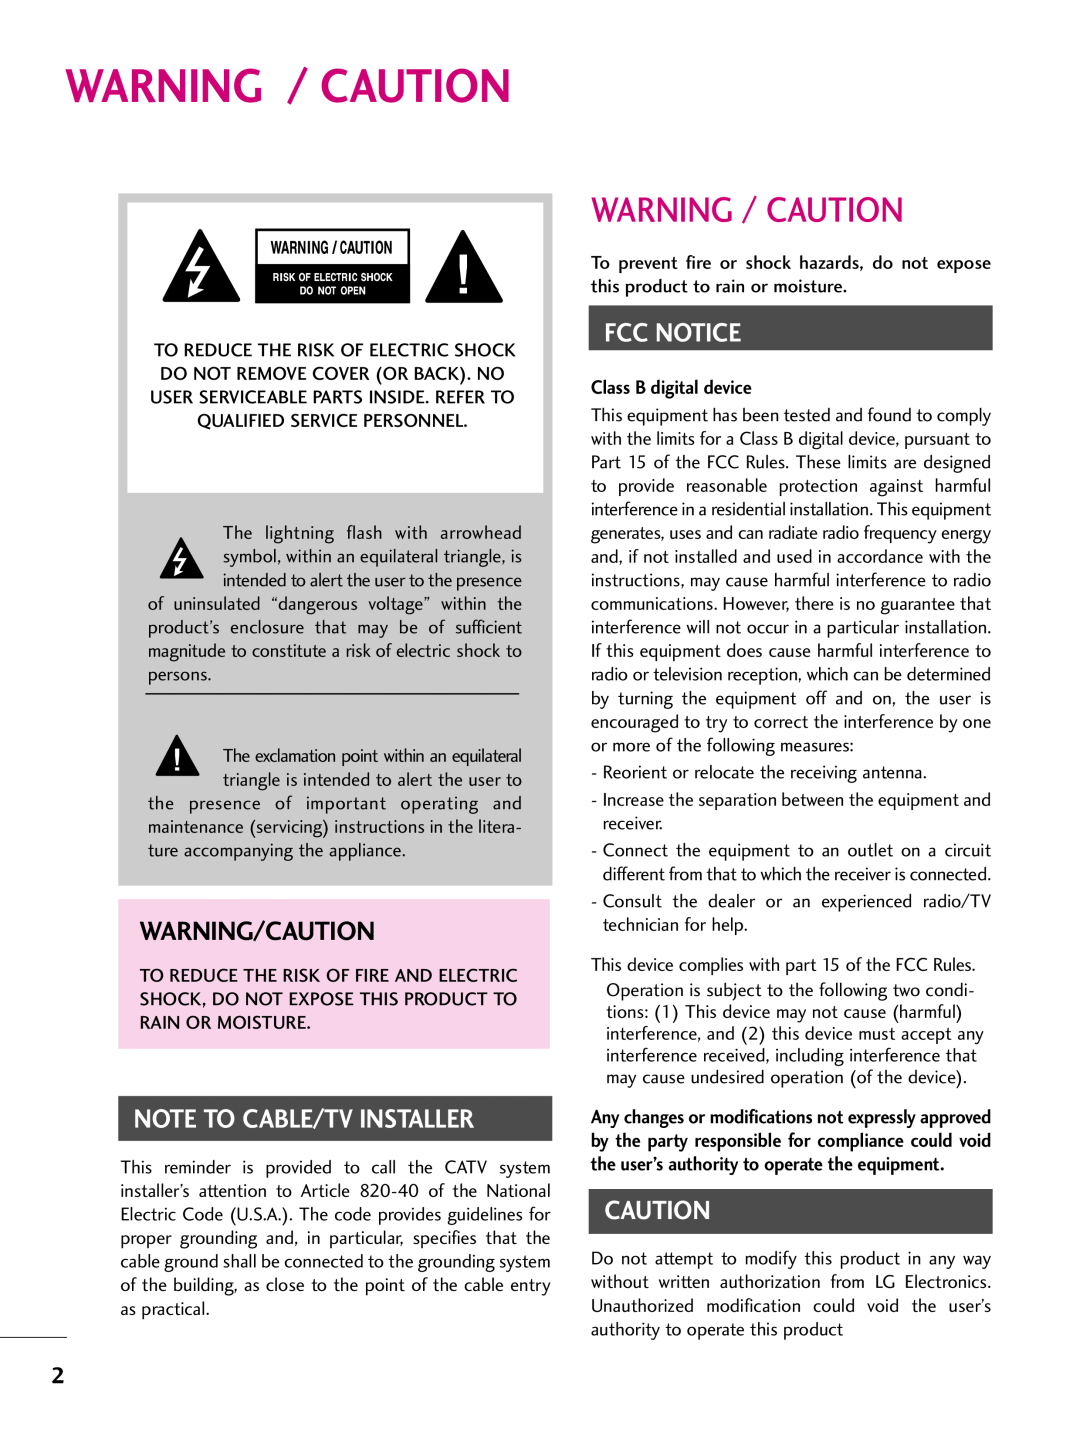 LG Electronics 42PJ250 Warning / Caution, Warning/Caution, Class B digital device, Note To Cable/Tv Installer, Fcc Notice 